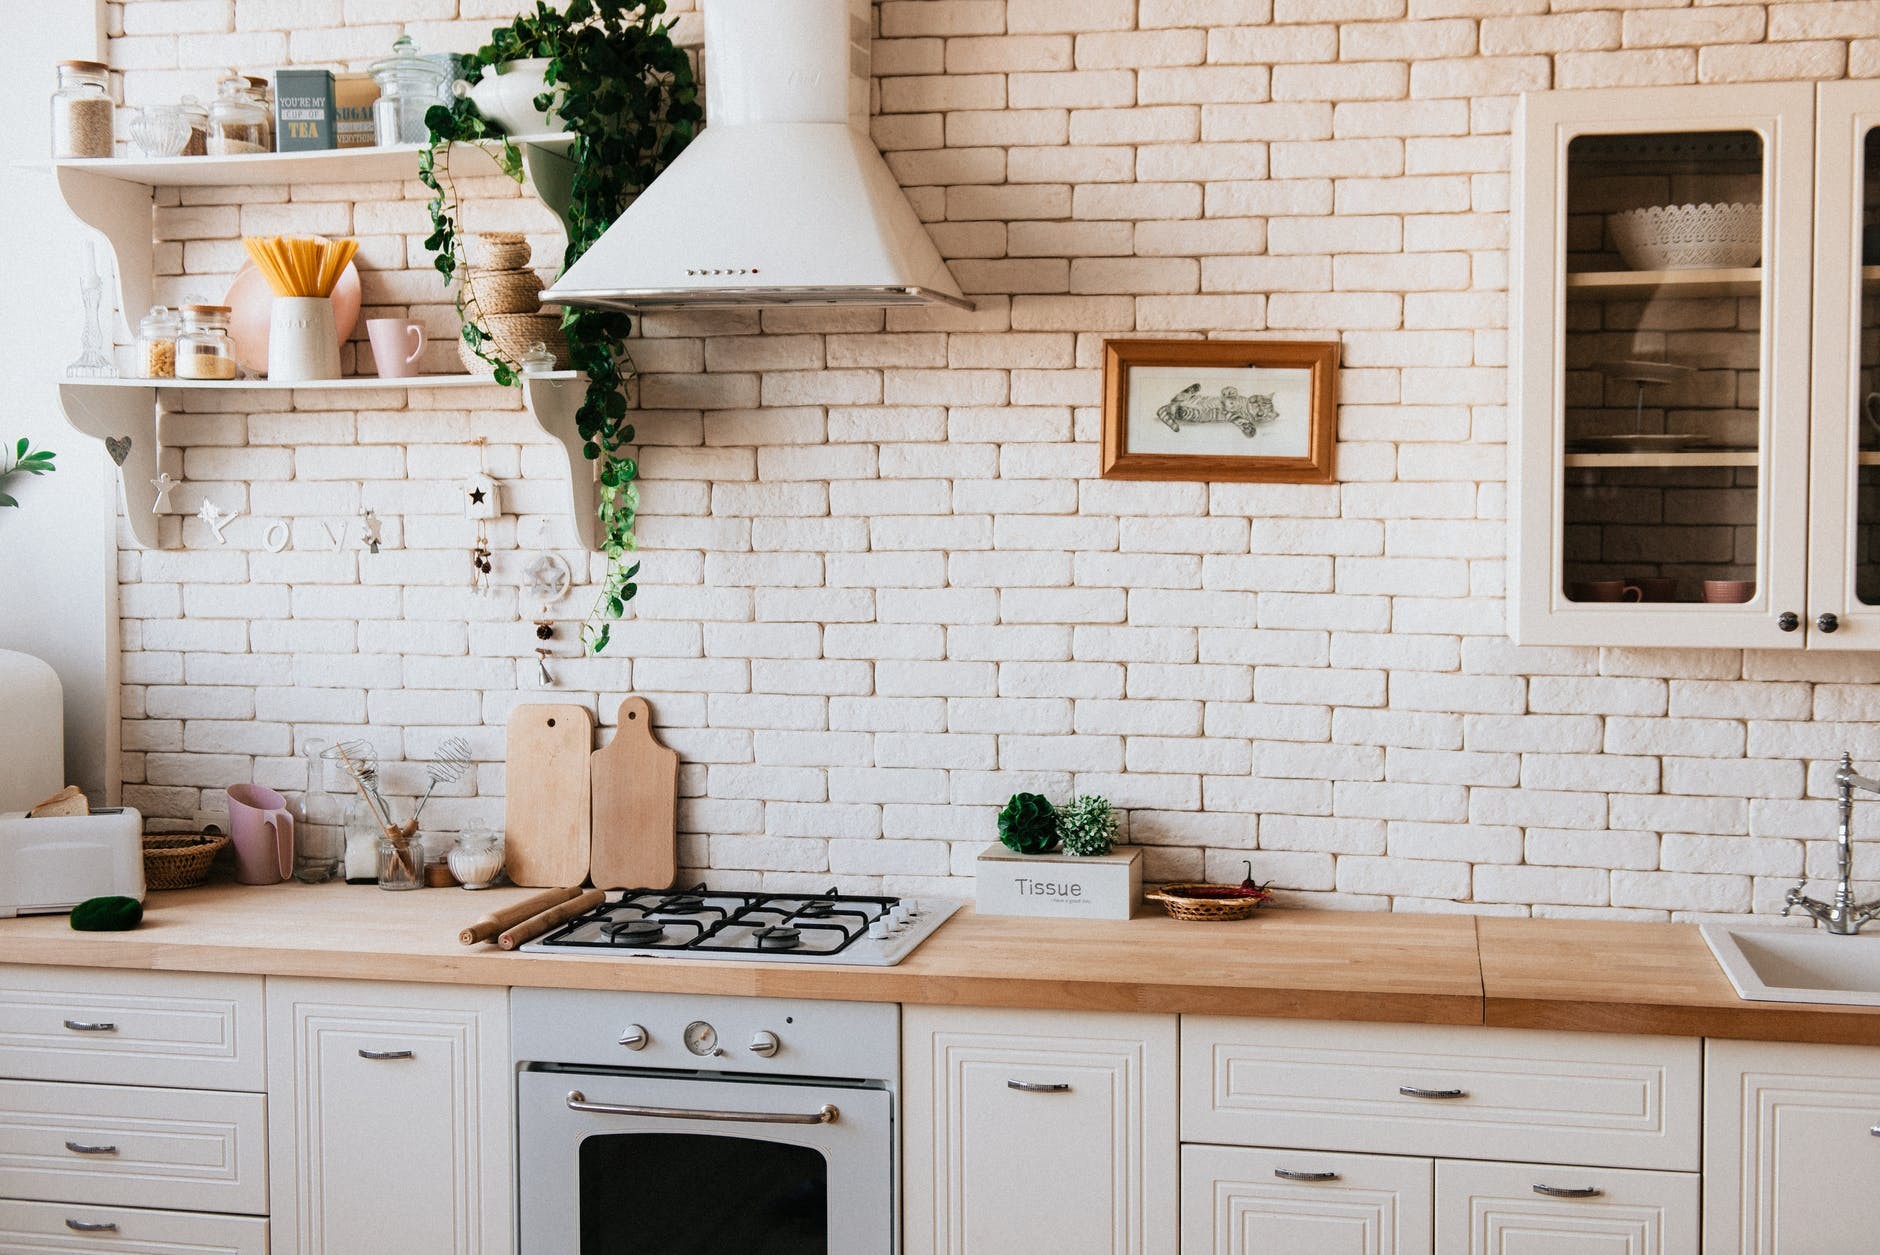 Join the Elite Club With These Chic Kitchen Decor Ideas